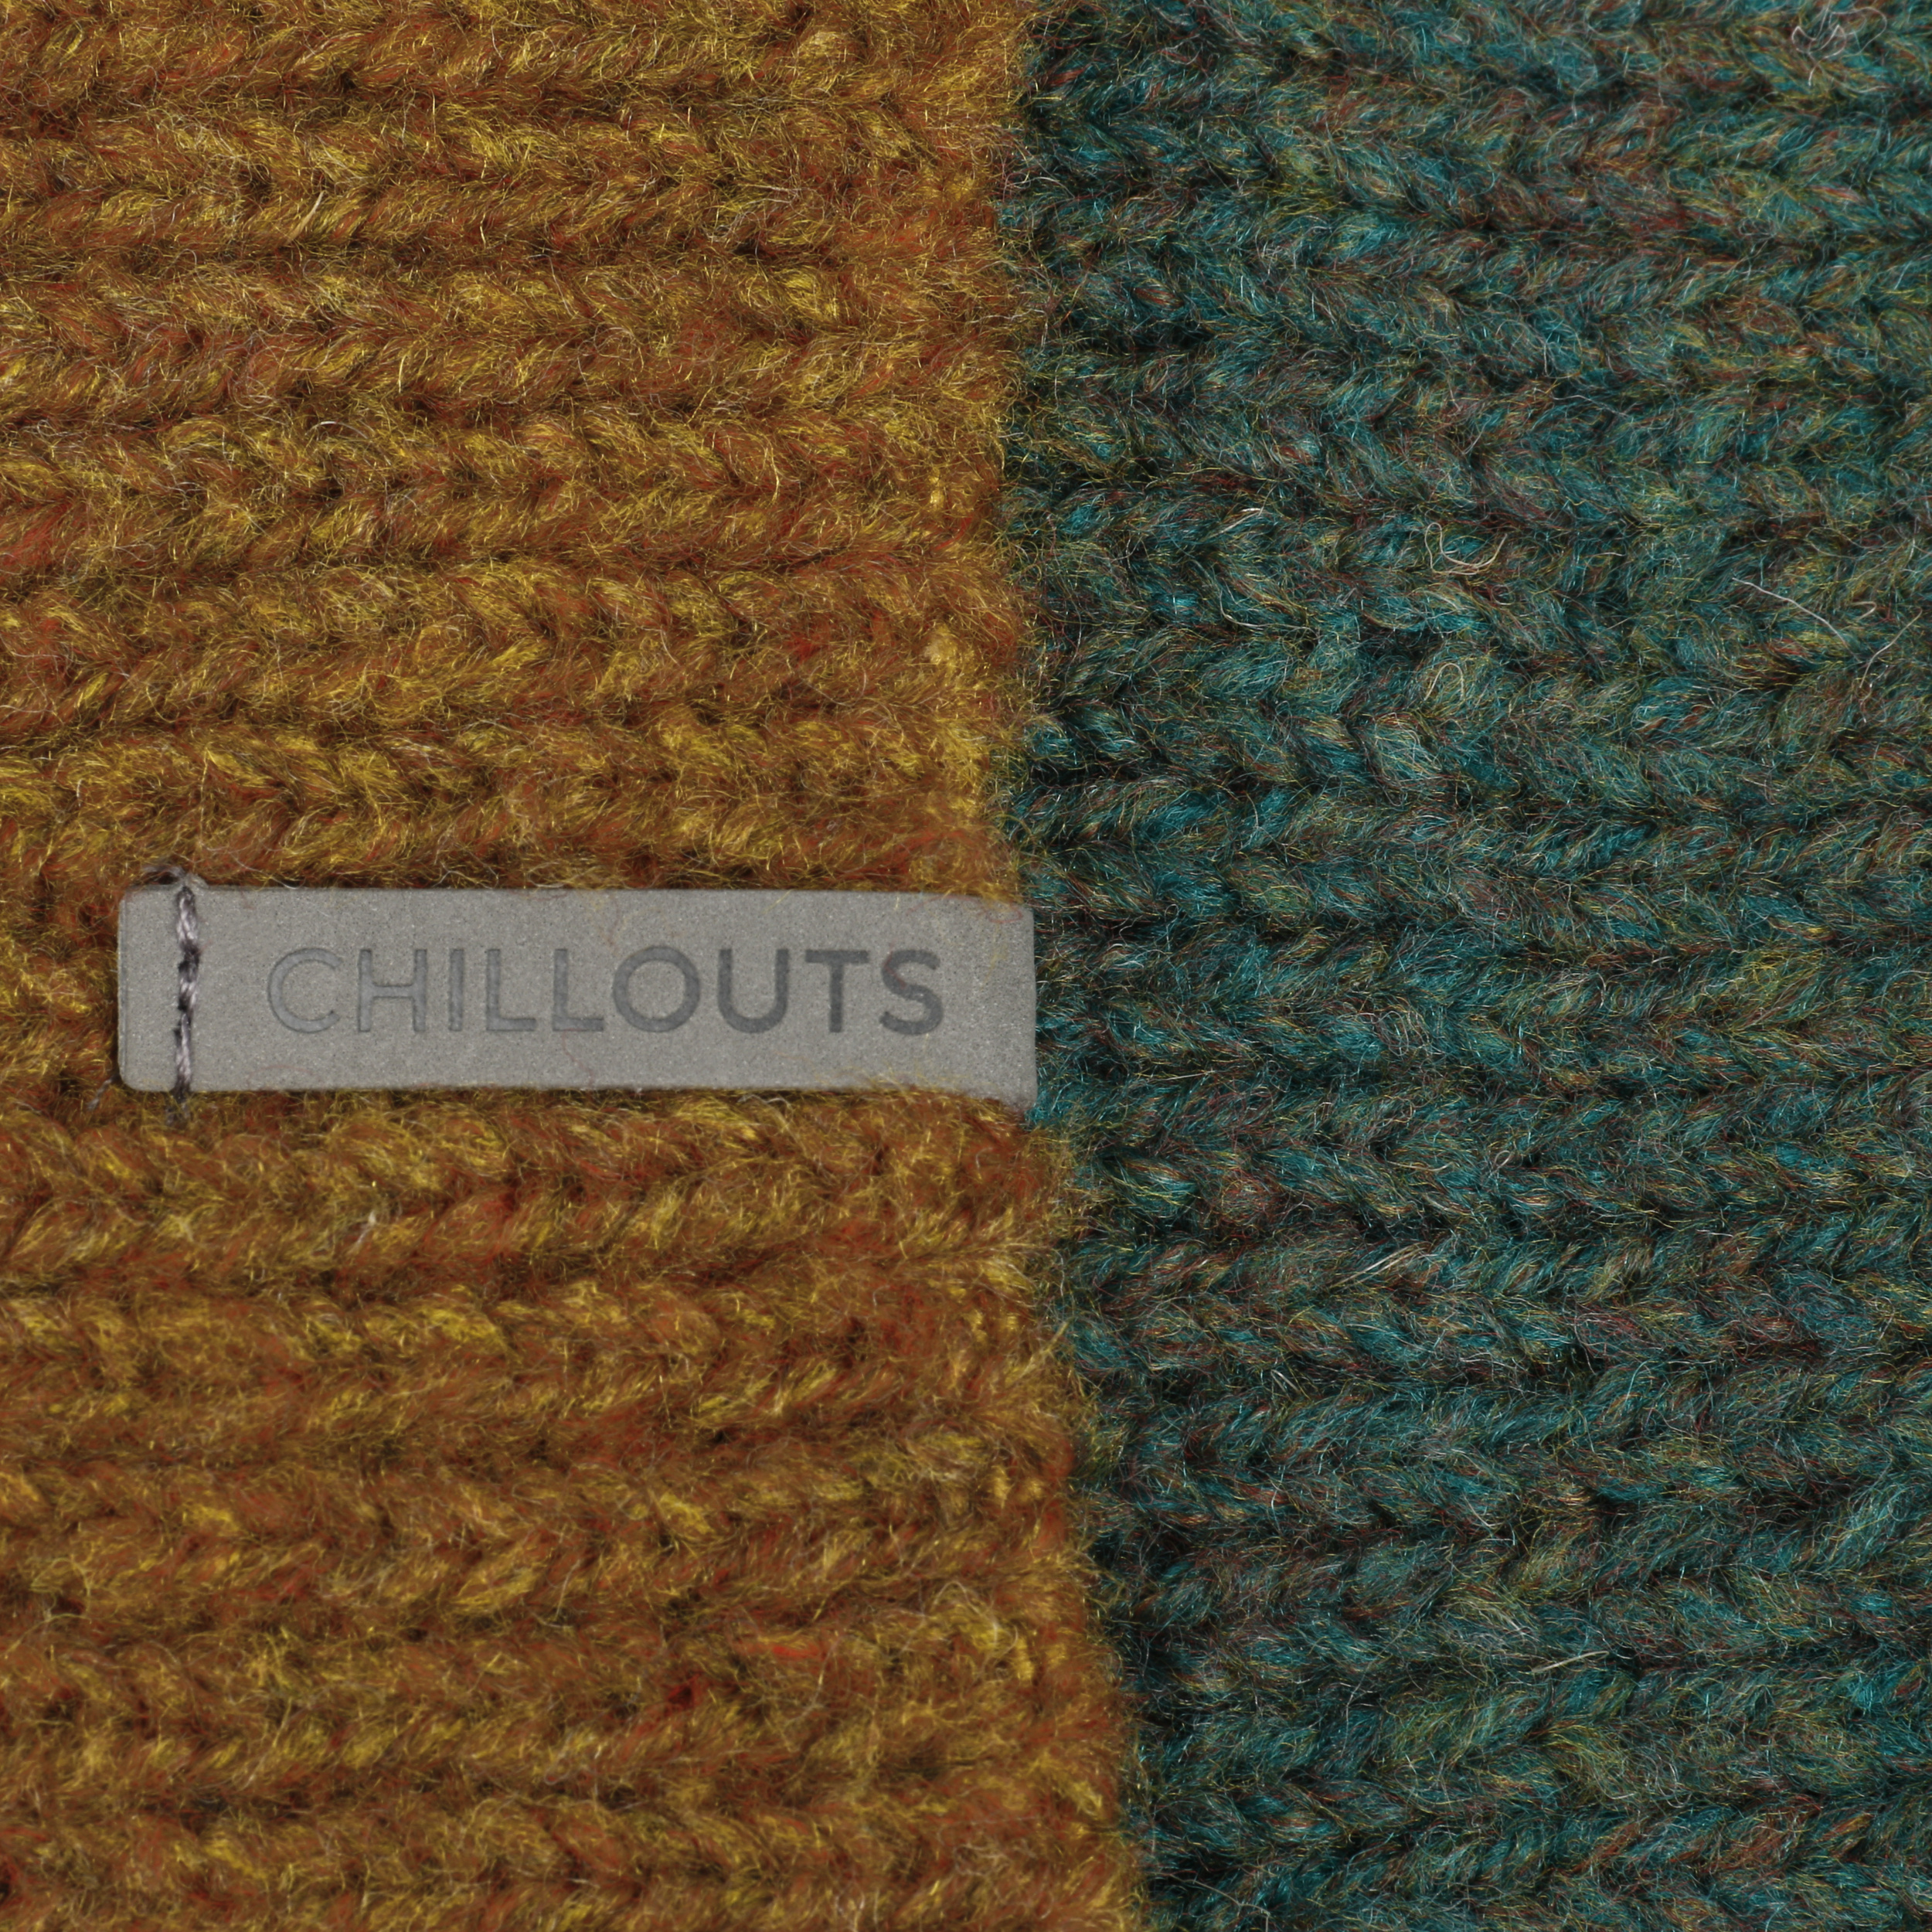 by € - Beanie 24,99 Fritz Chillouts